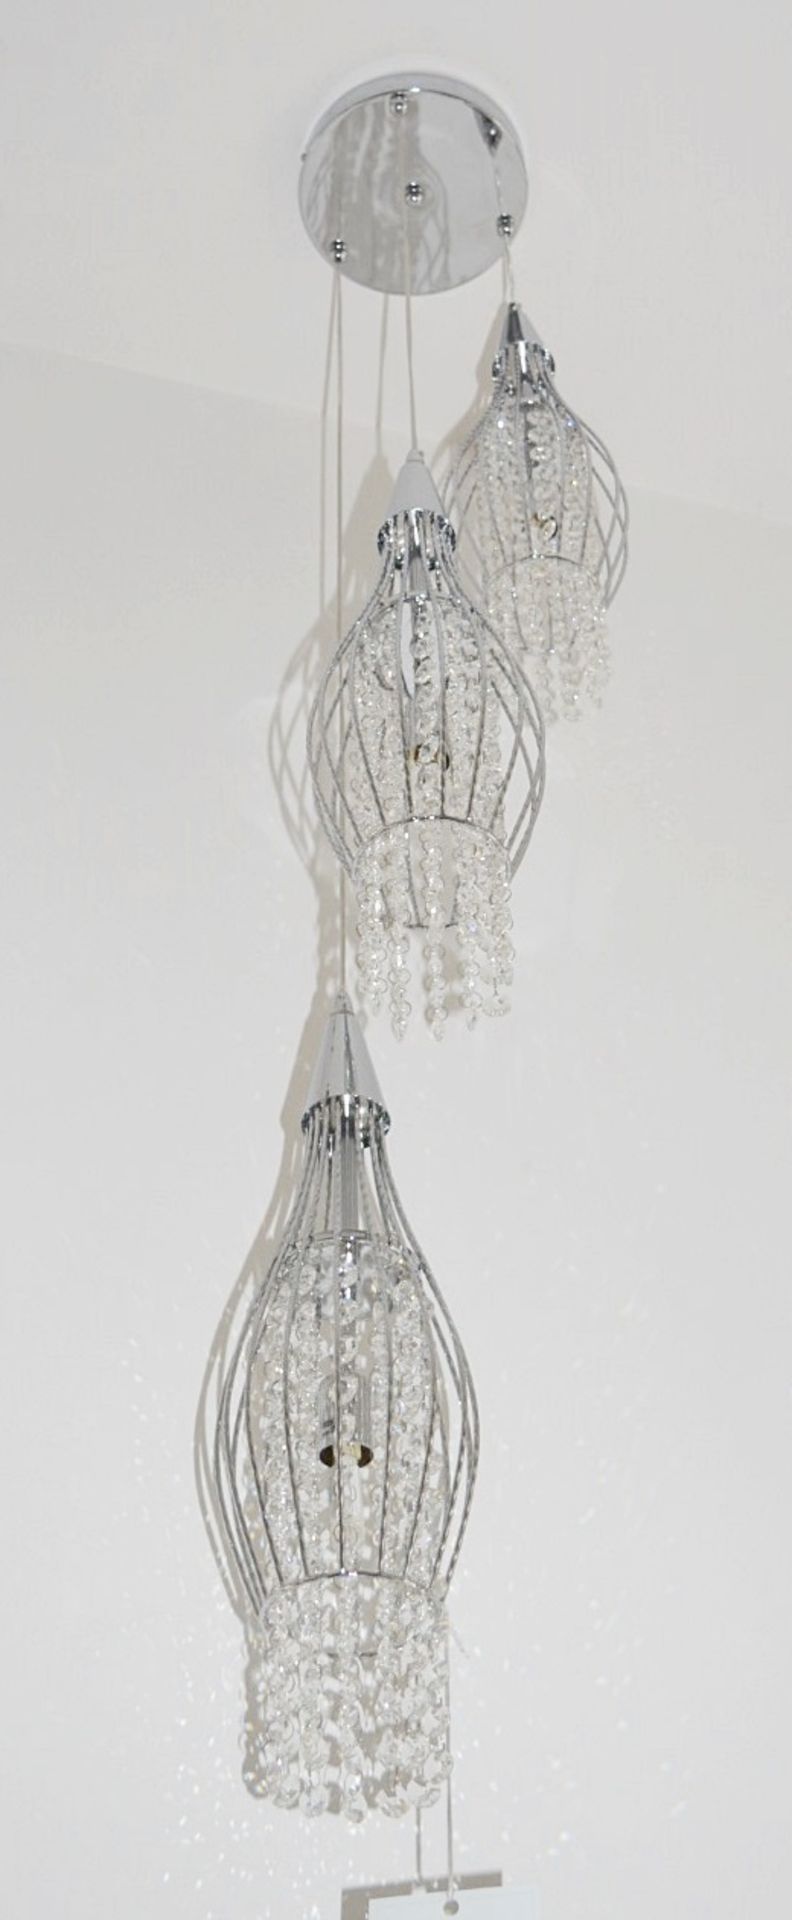 1 x Rocket Chrome 3-Light Cage Multi-drop Pendant Light With Clear Crystal Buttons - RRP £228.00 - Image 2 of 4